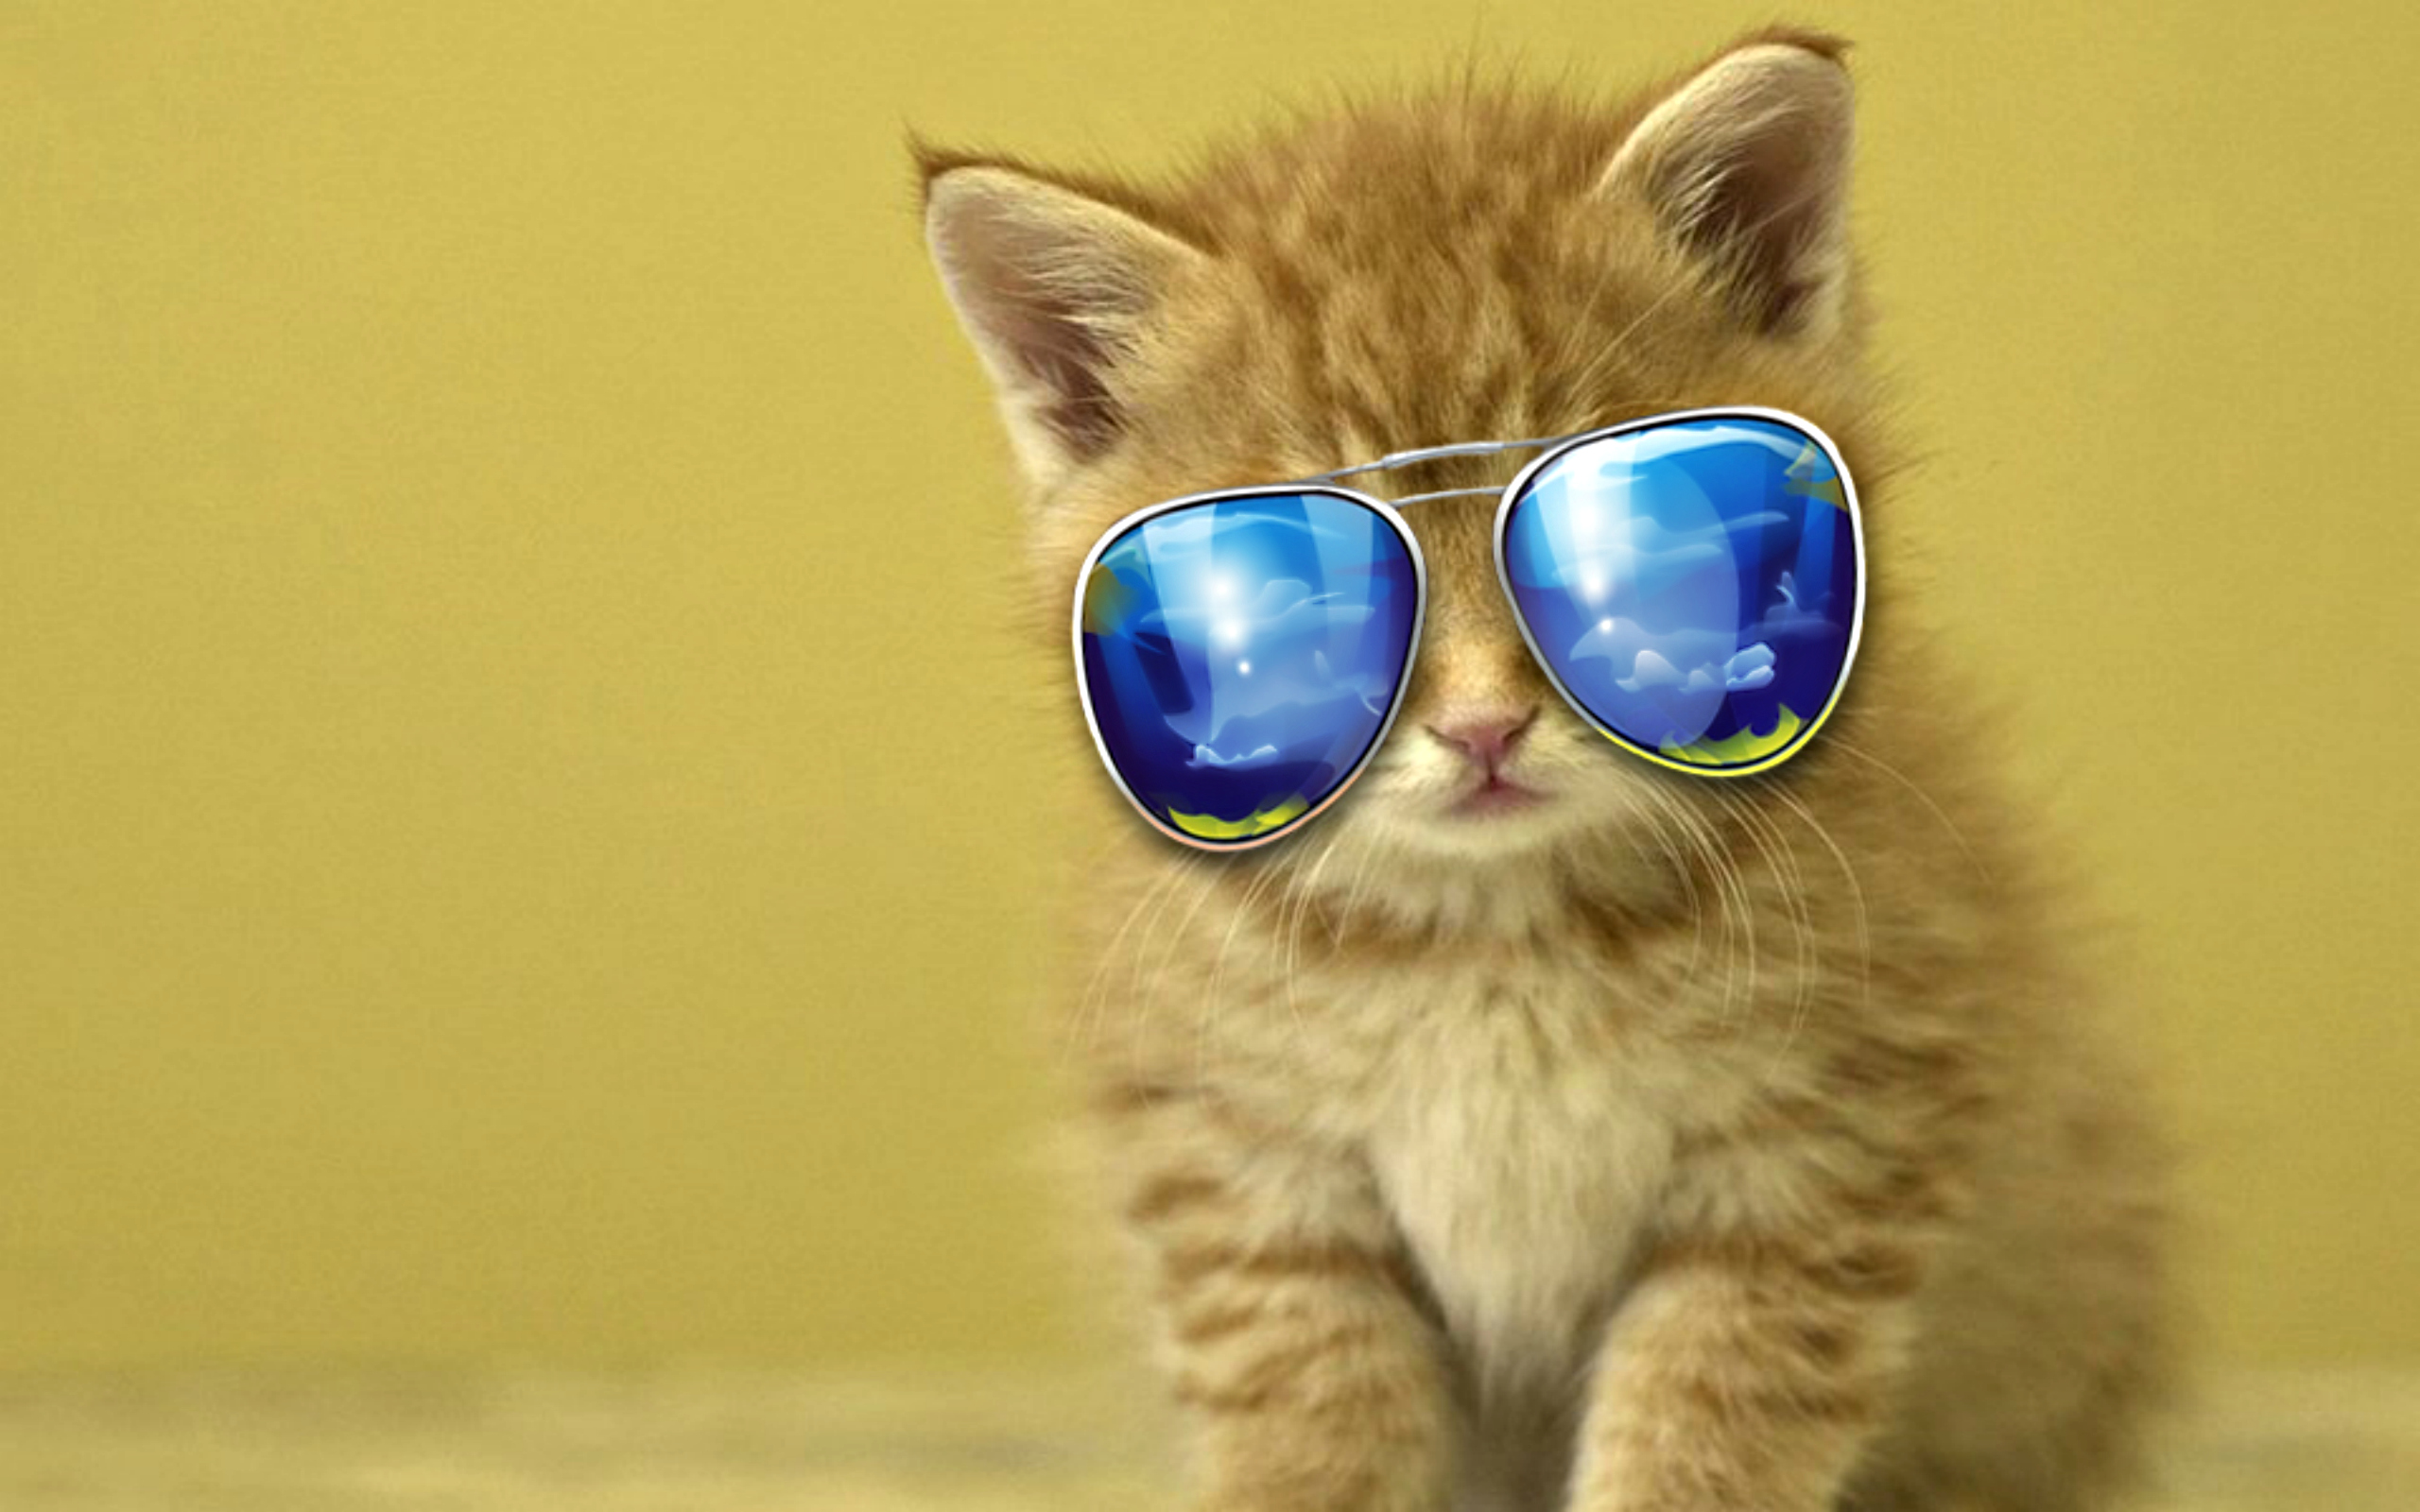 Cool Cat WallpaperAmazoninAppstore for Android